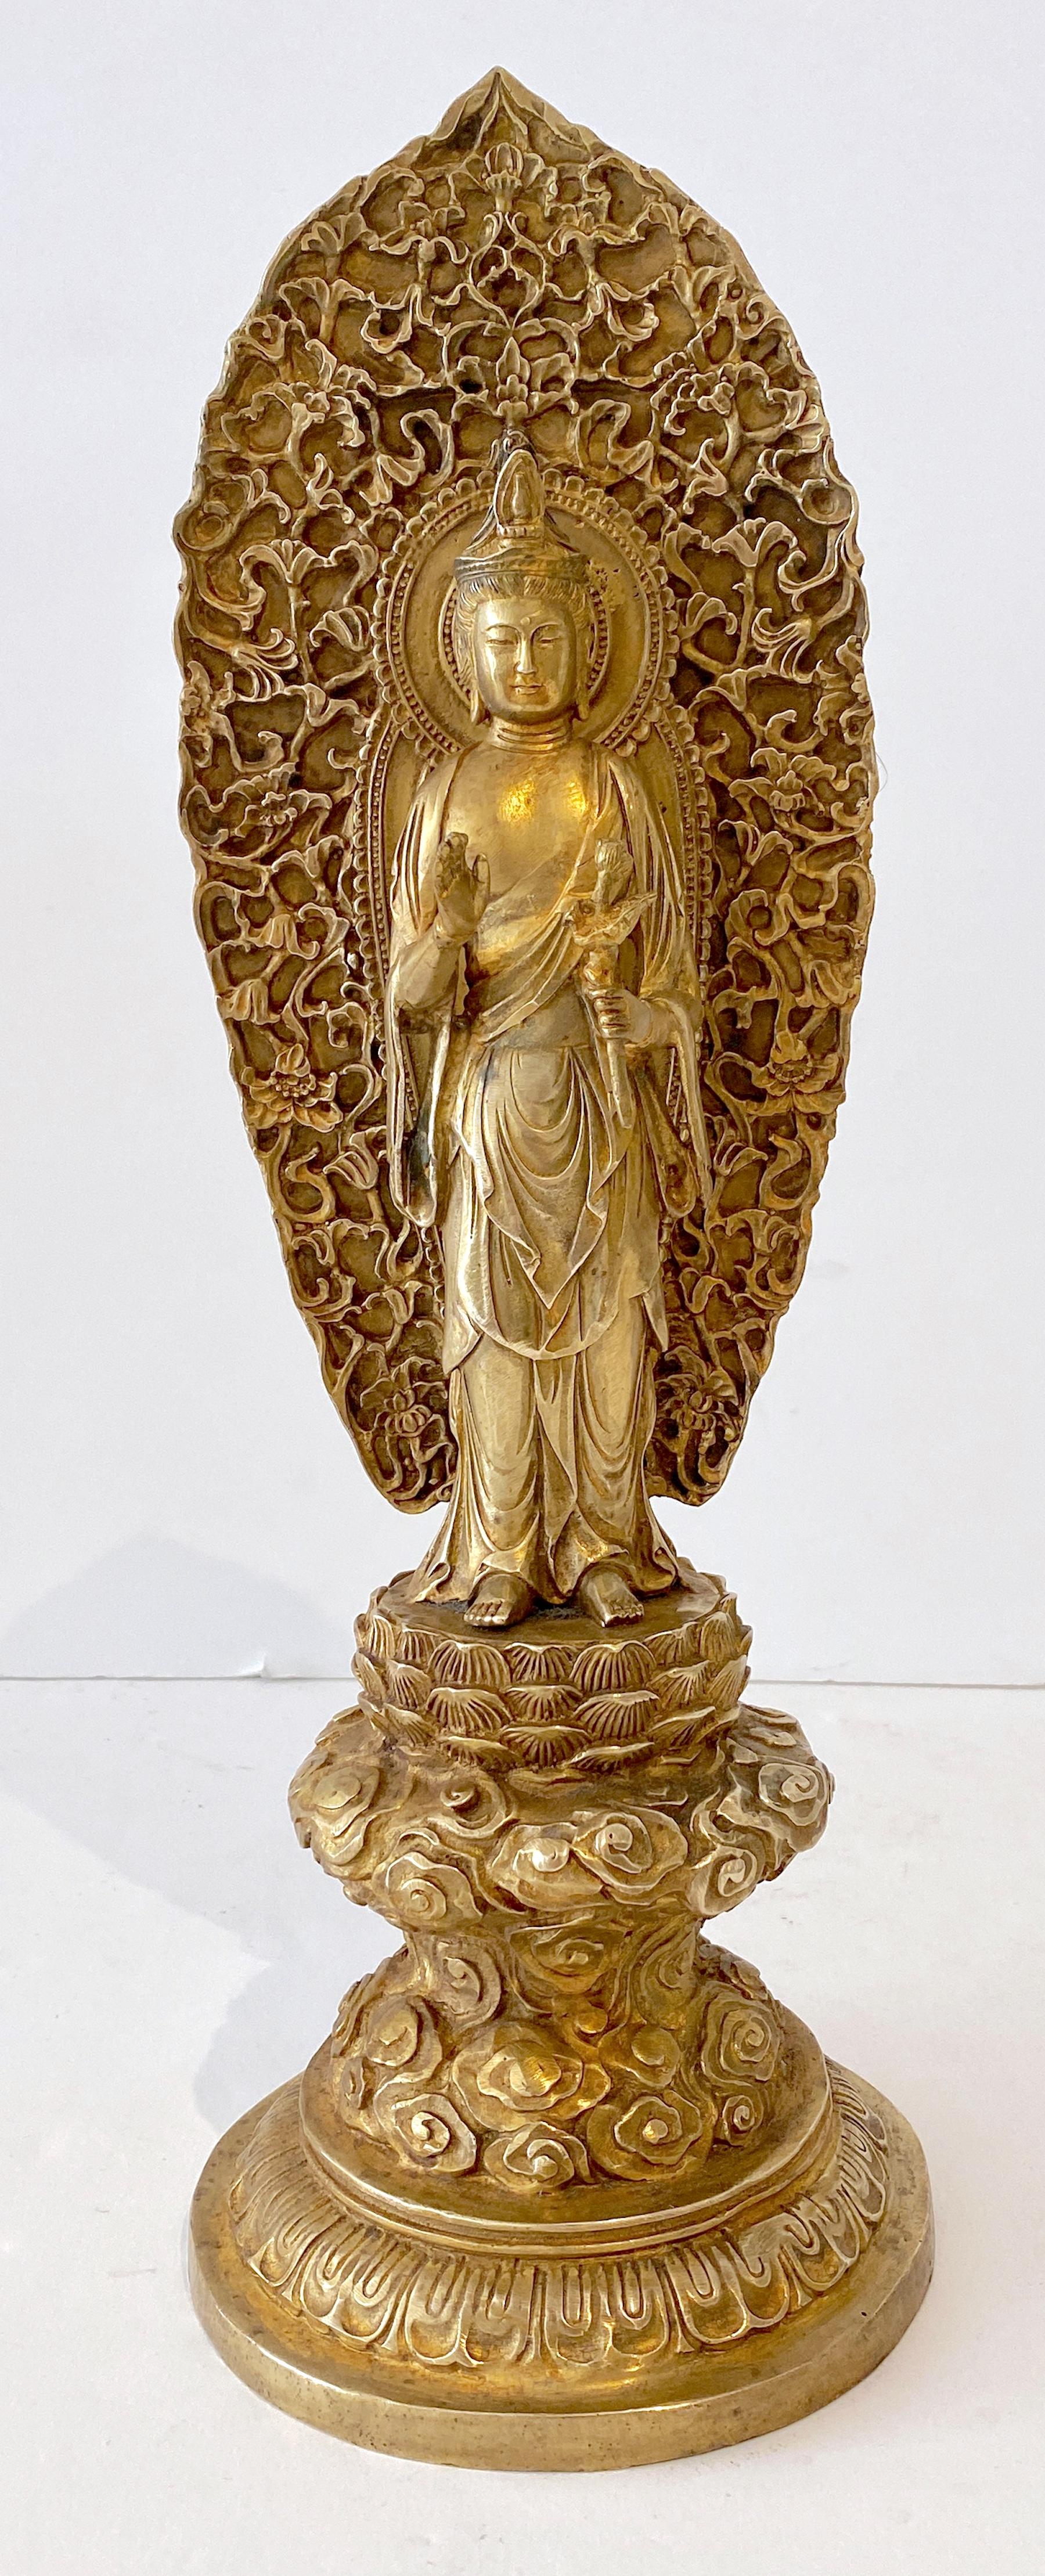 Large Tibetan Gilt Bronze Standing Buddha with Halo  
China, 20th century 
The slender figure is finely cast and shown standing the right hand is raised in abhayamudra, and the left holding a branch. Surrounded by a large and elaborate halo. 
Marked